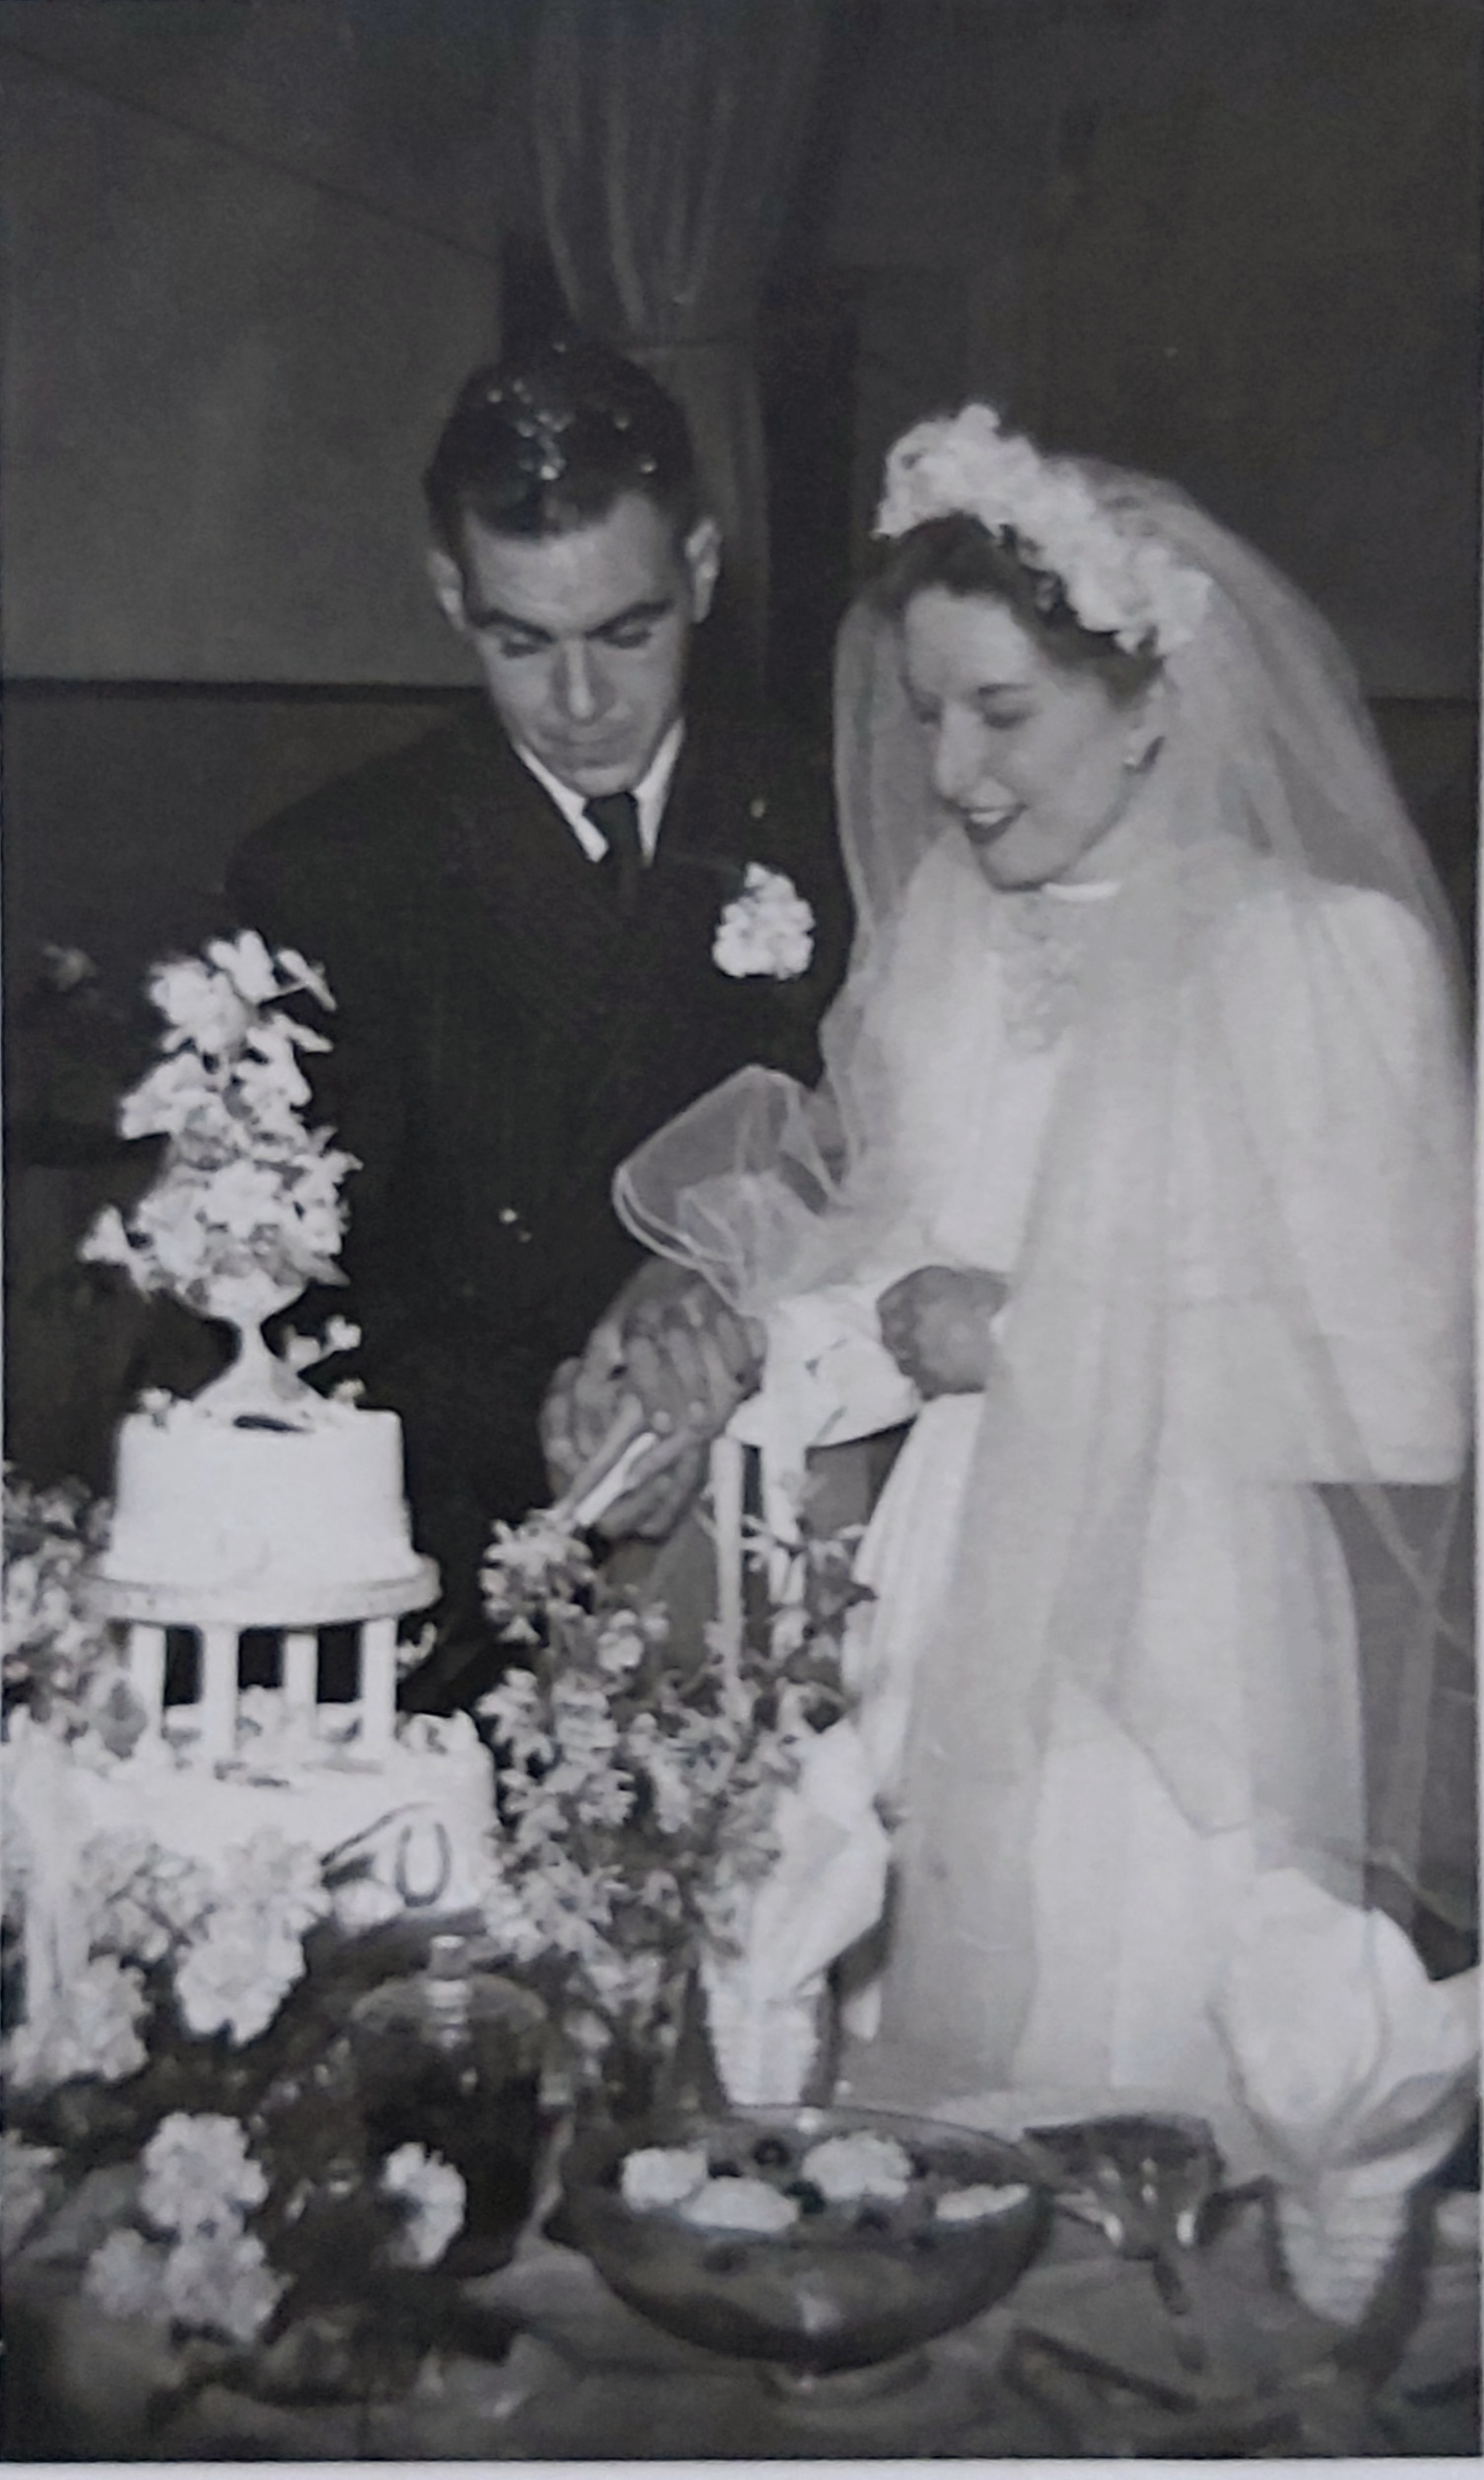 Roy and Eve cutting the cake on their wedding day in 1951